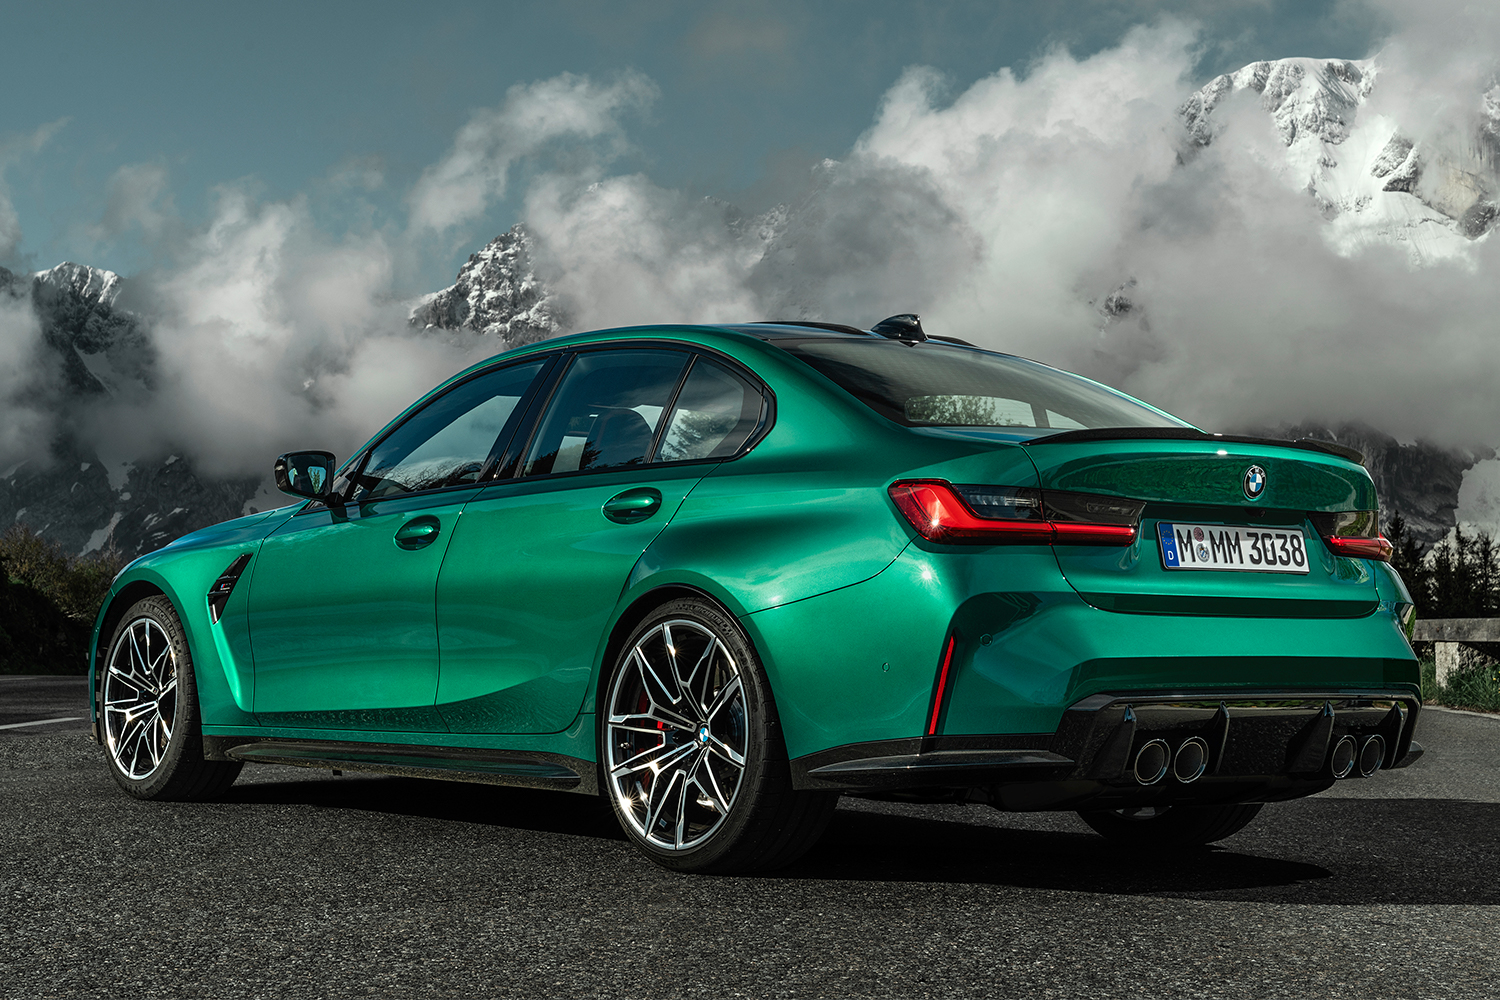 The new BMW M3 Competiton Sedan in green sits on the road with snow-capped mountains covered in clouds in the background